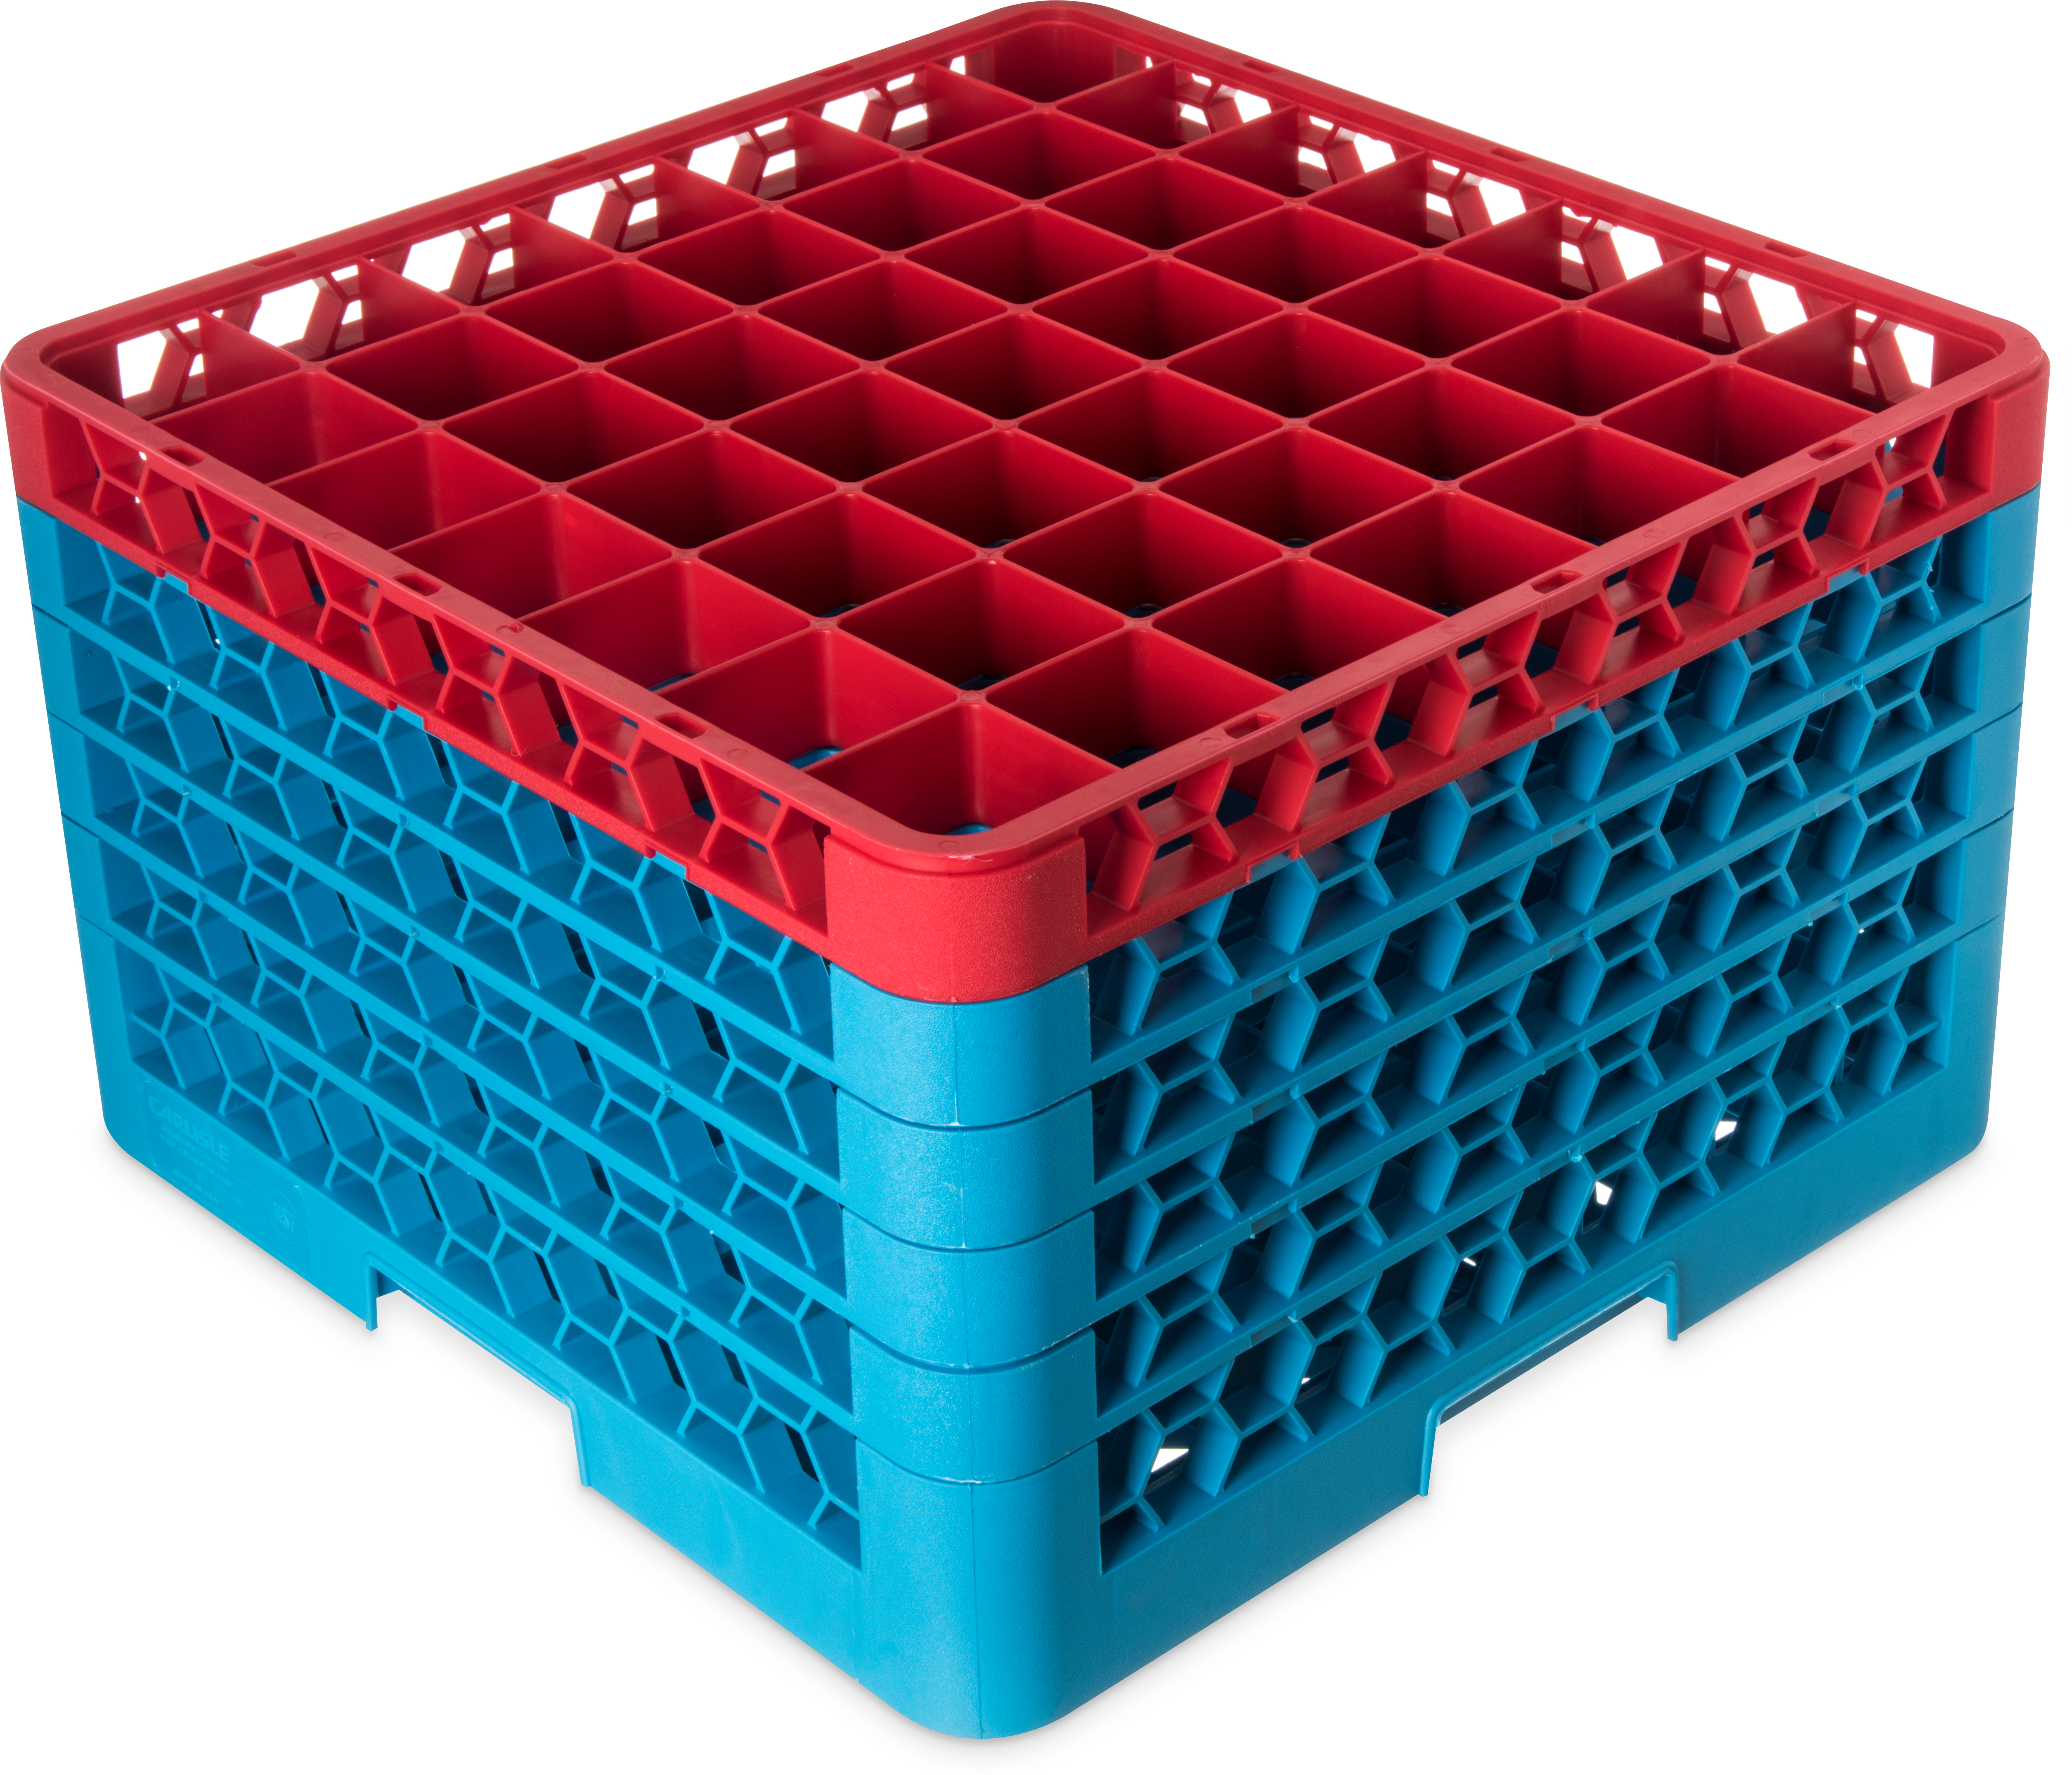 OptiClean 49 Compartment Glass Rack with 5 Extenders 11.9 - Red-Carlisle Blue